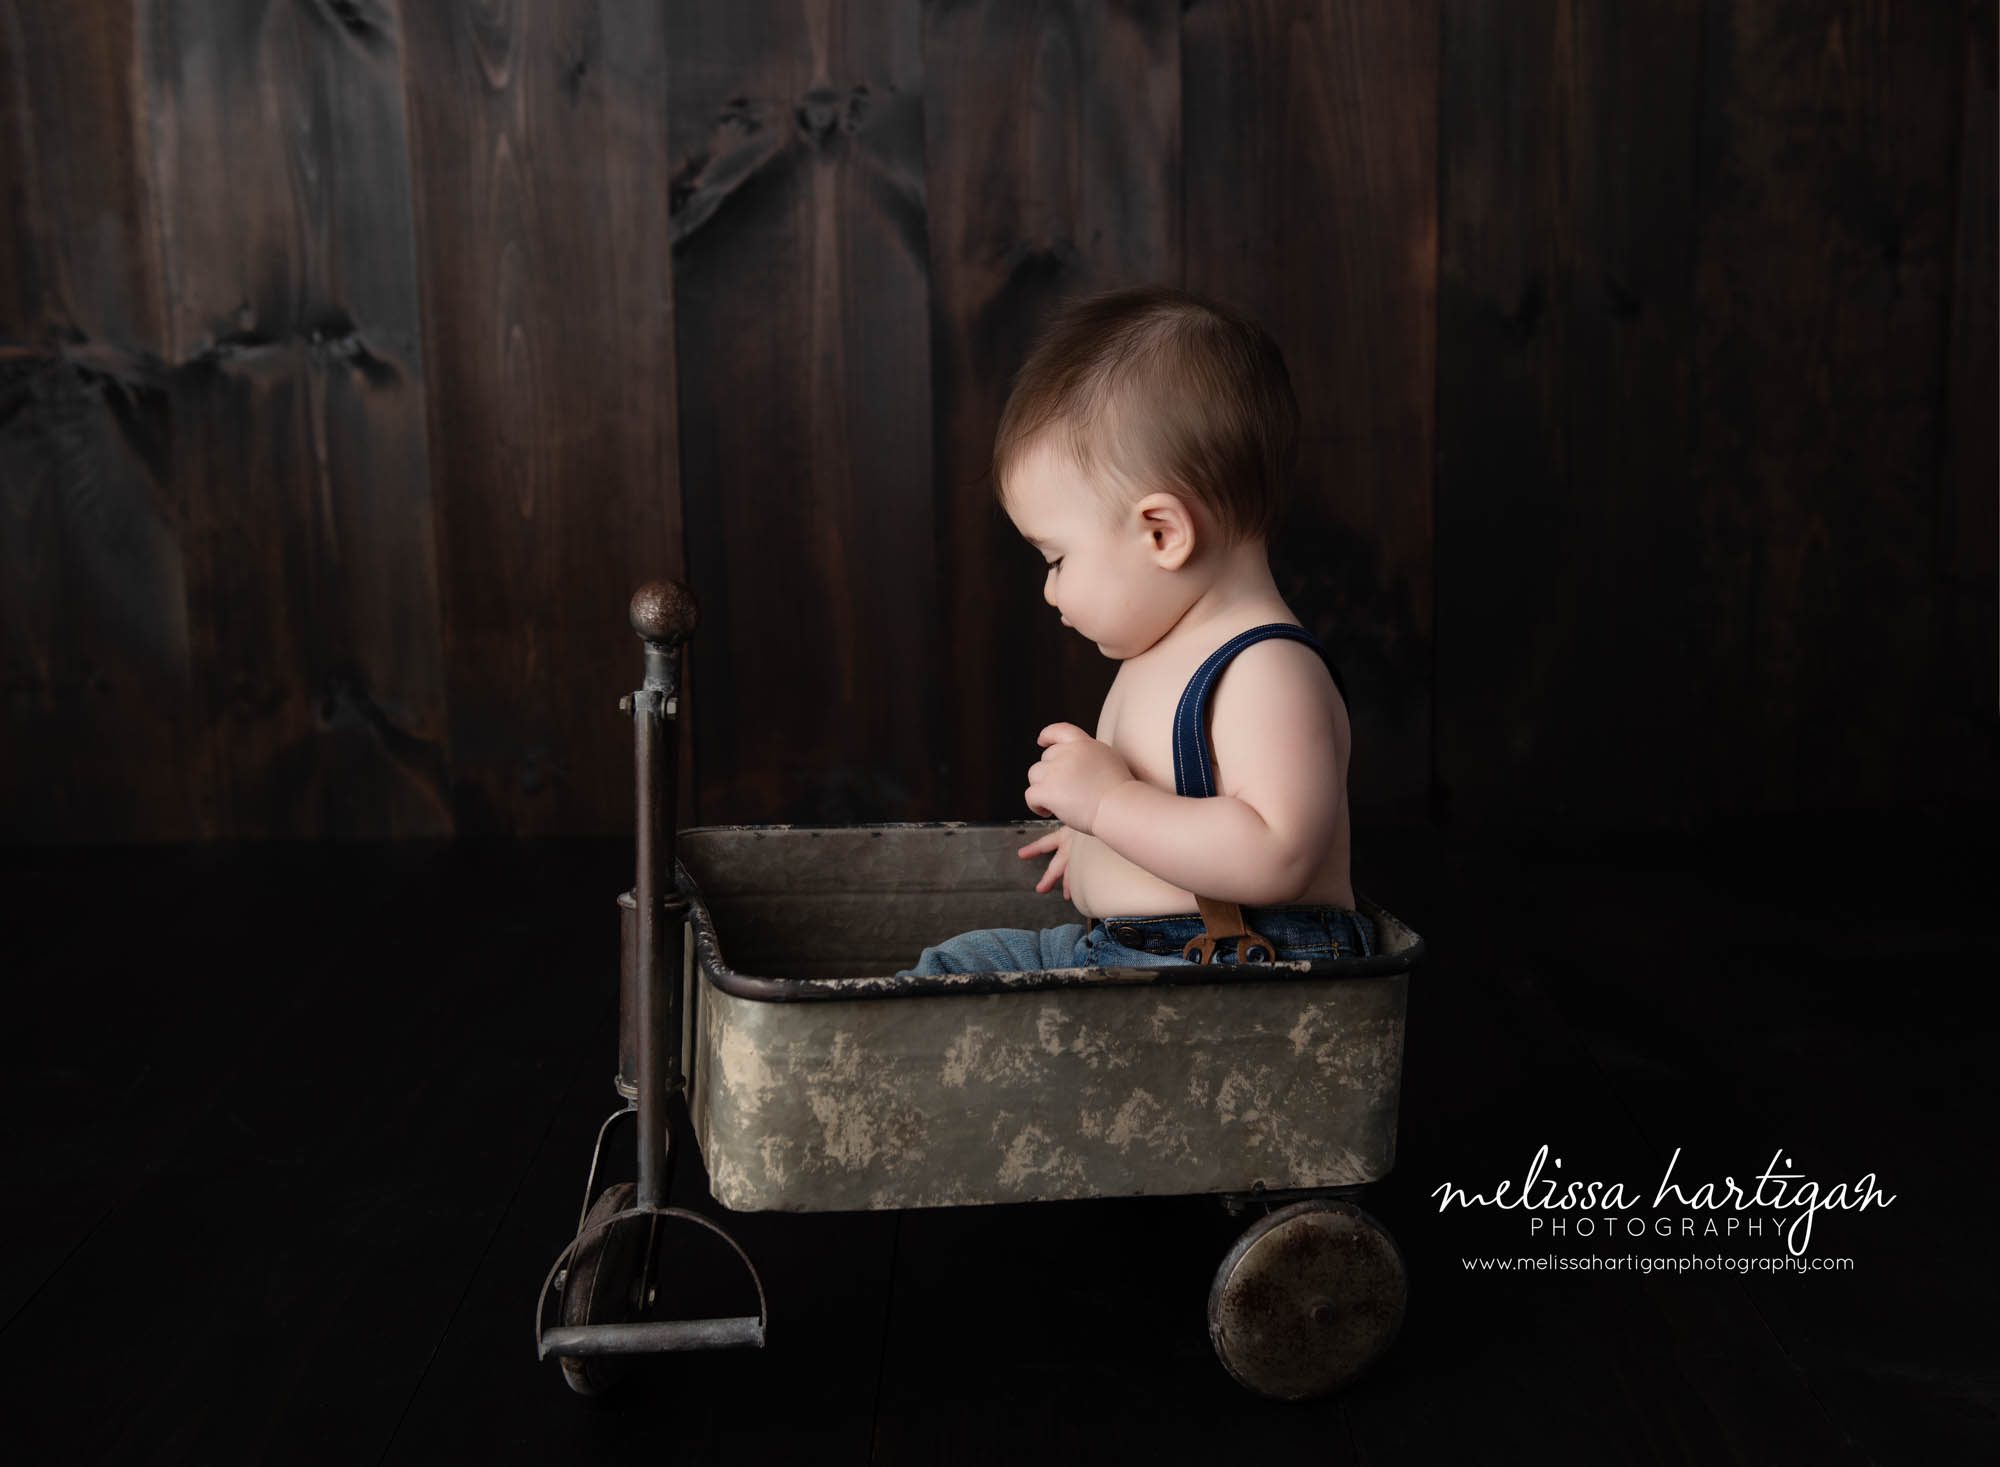 Baby boy sitting in wagon in baby milestone photography session in CT studio